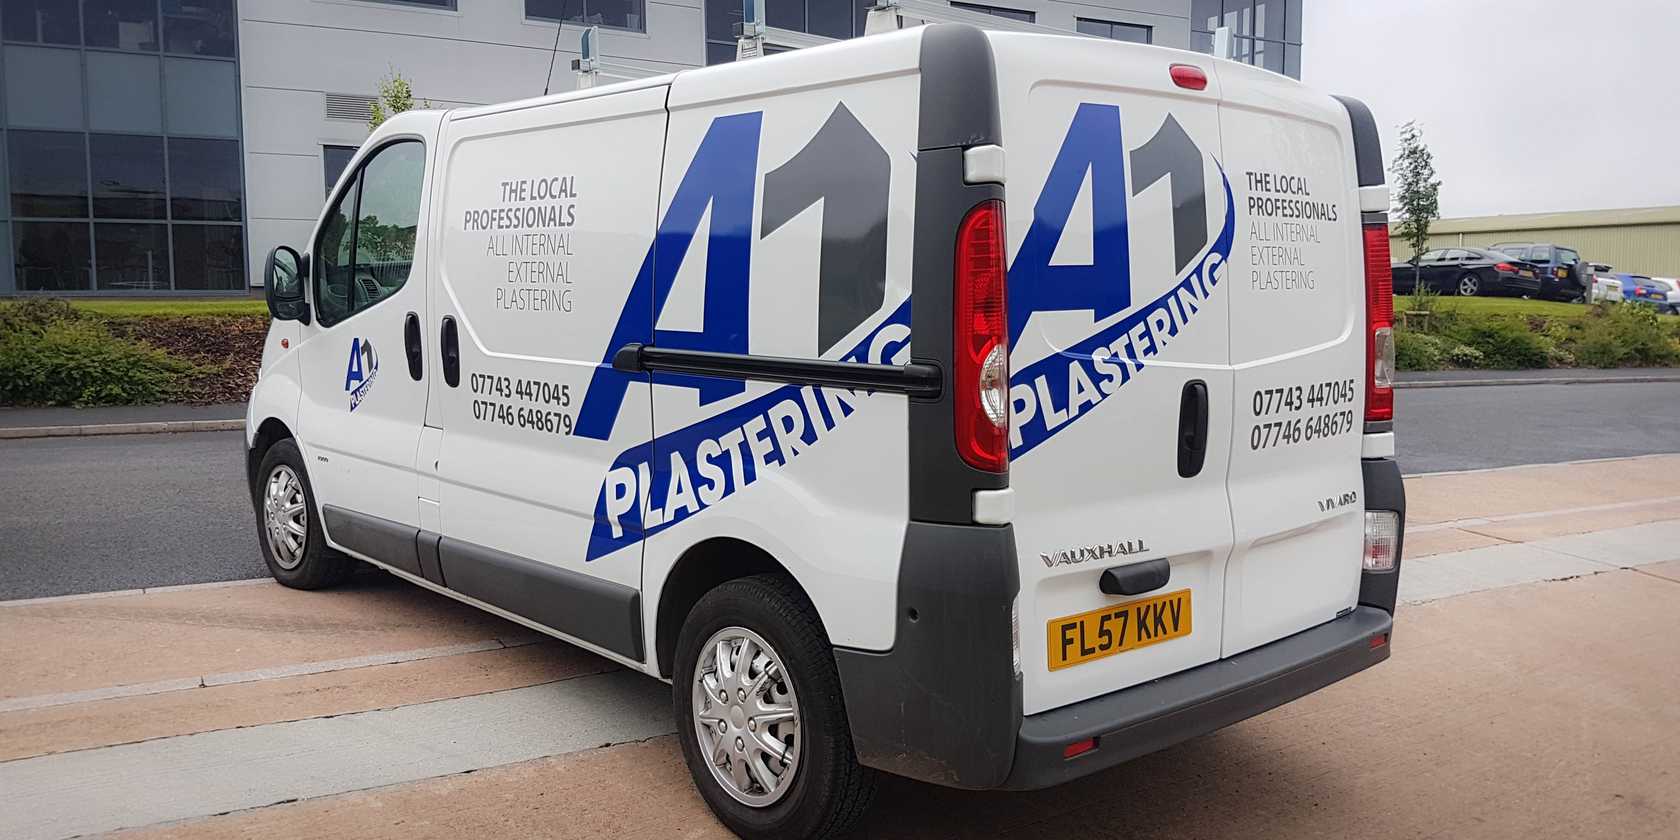 A1 Plastering Vehicle Graphics